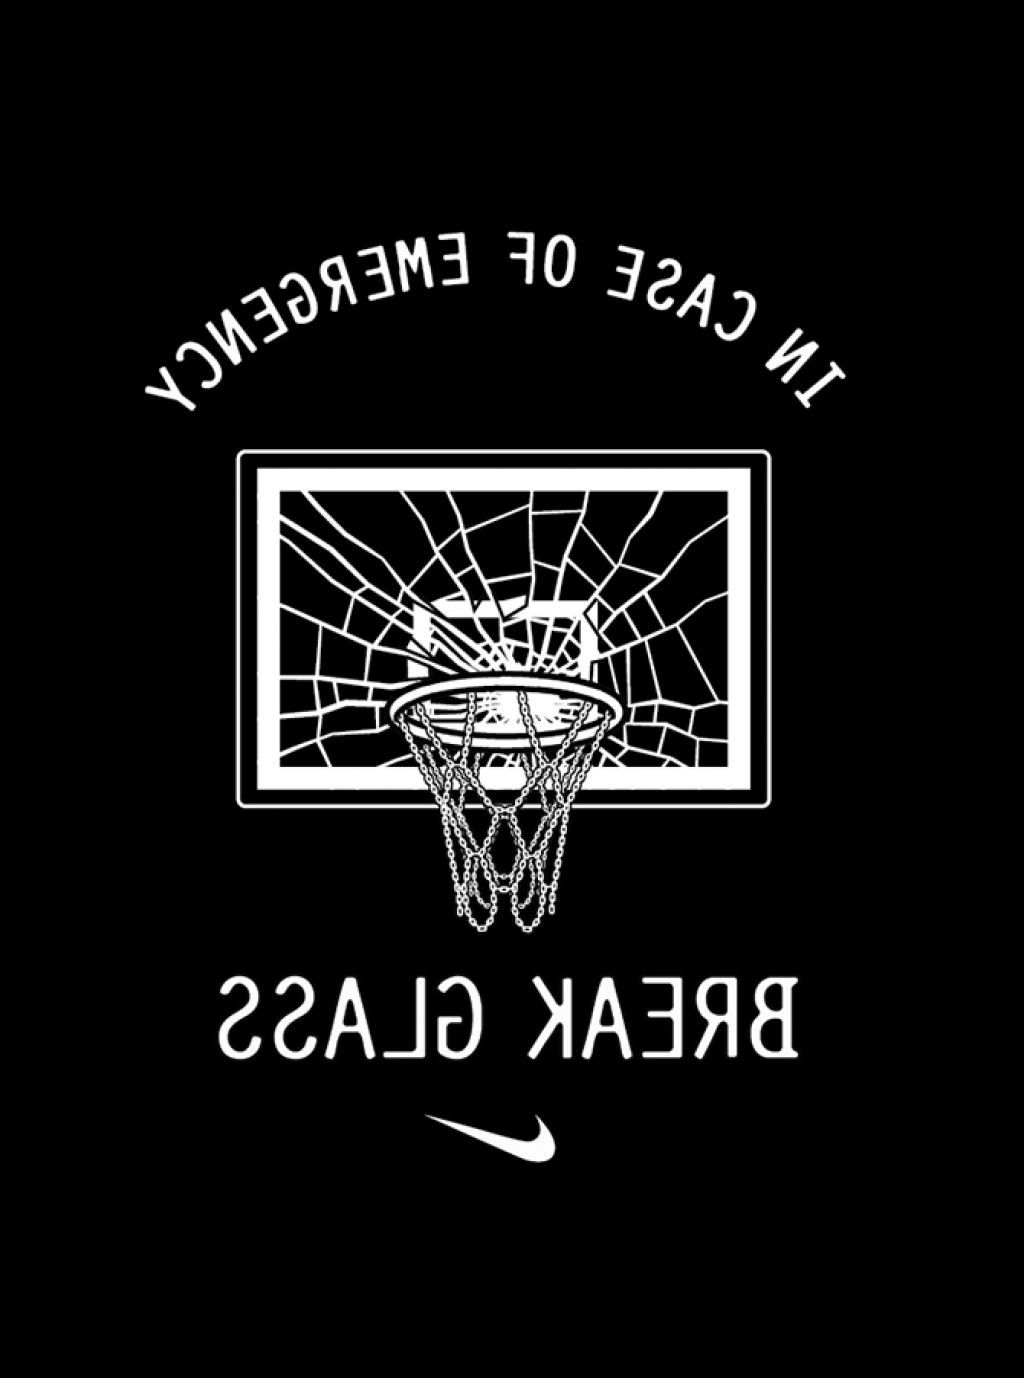 Basketball Quotes Wallpaper For Android. Basketball wallpaper, Basketball quotes, Nike basketball